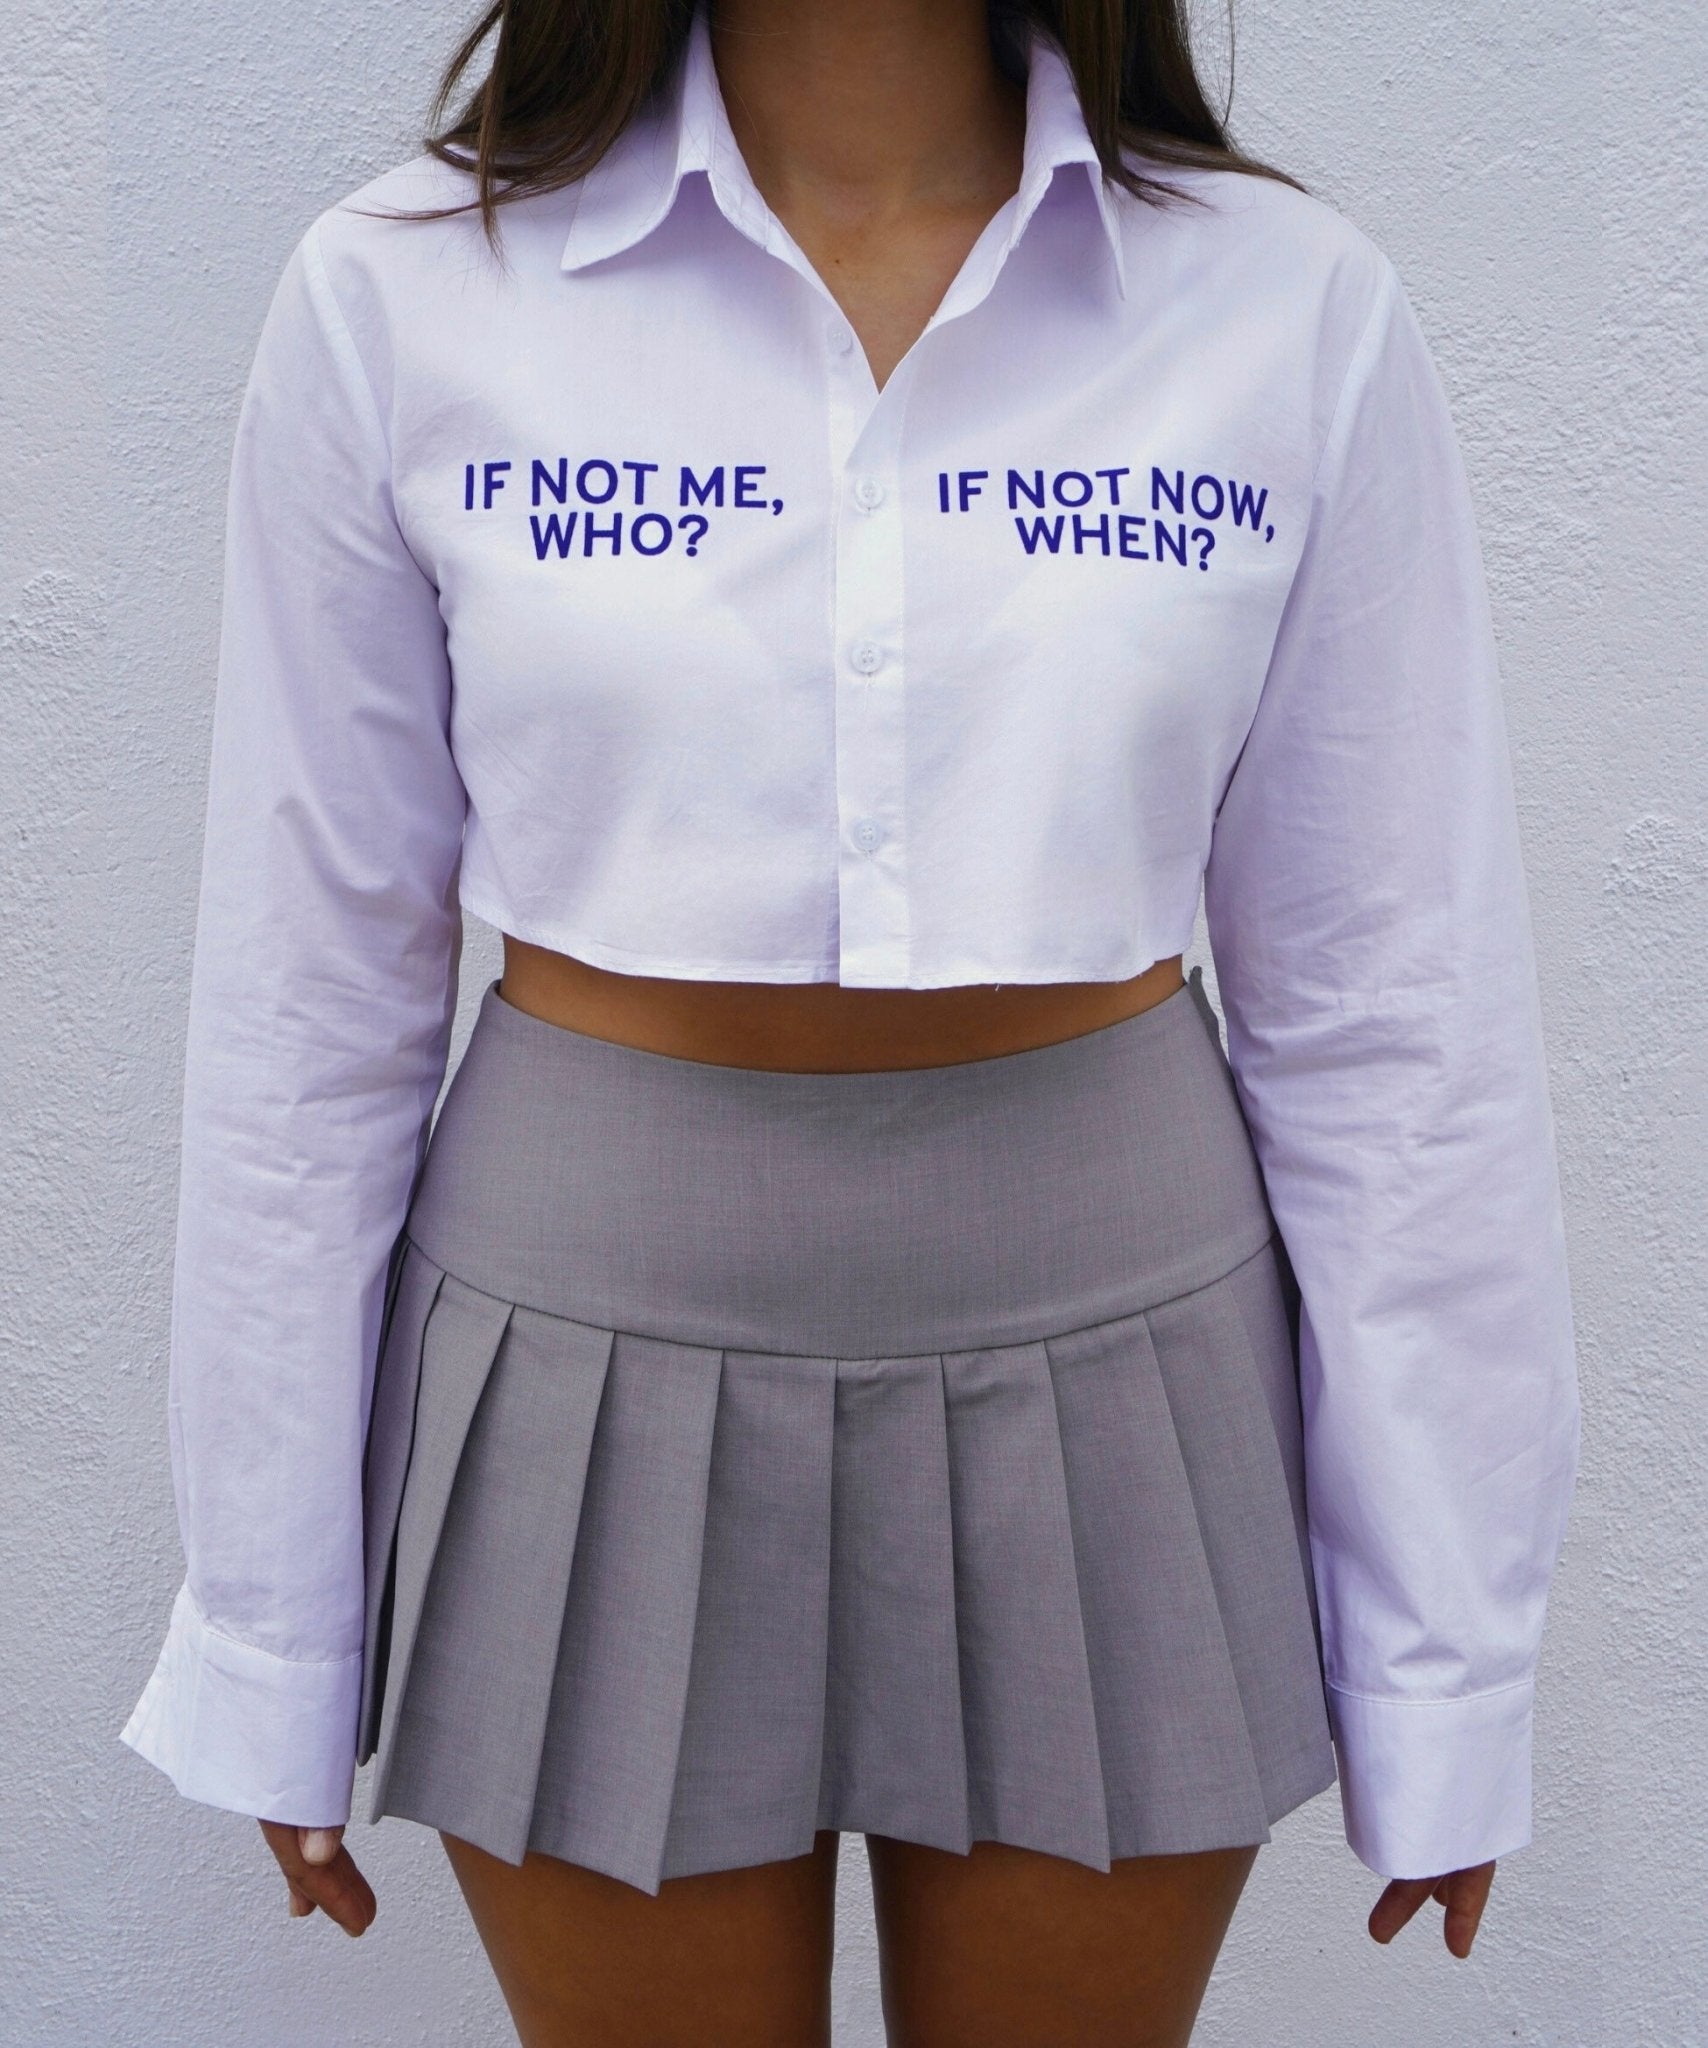 White Shirt 'IF NOT ME, WHO? IF NOT NOW, WHEN?' - Electric Blue - OBLIVIOUS?